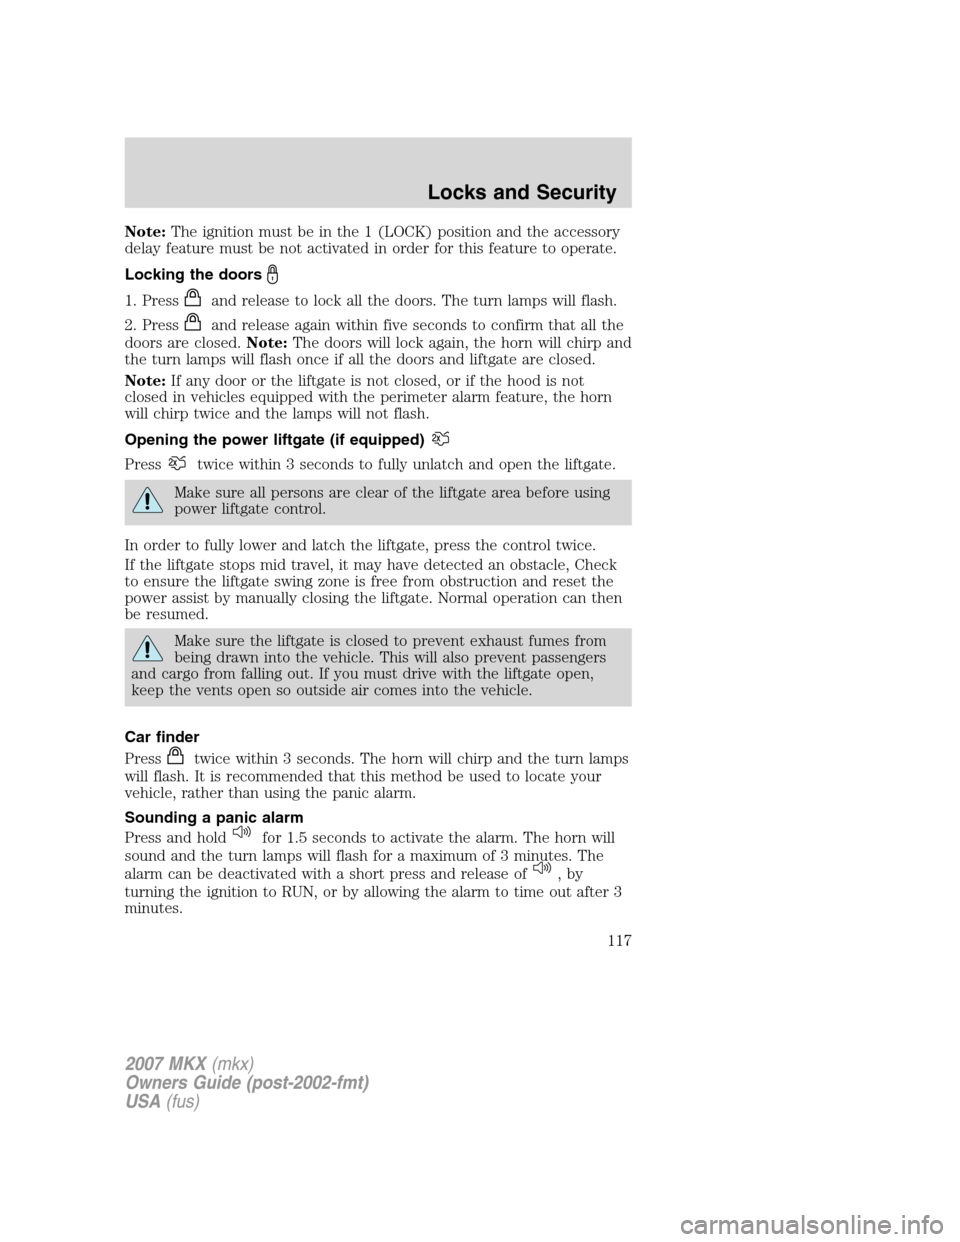 LINCOLN MKX 2007  Owners Manual Note:The ignition must be in the 1 (LOCK) position and the accessory
delay feature must be not activated in order for this feature to operate.
Locking the doors
1. Pressand release to lock all the doo